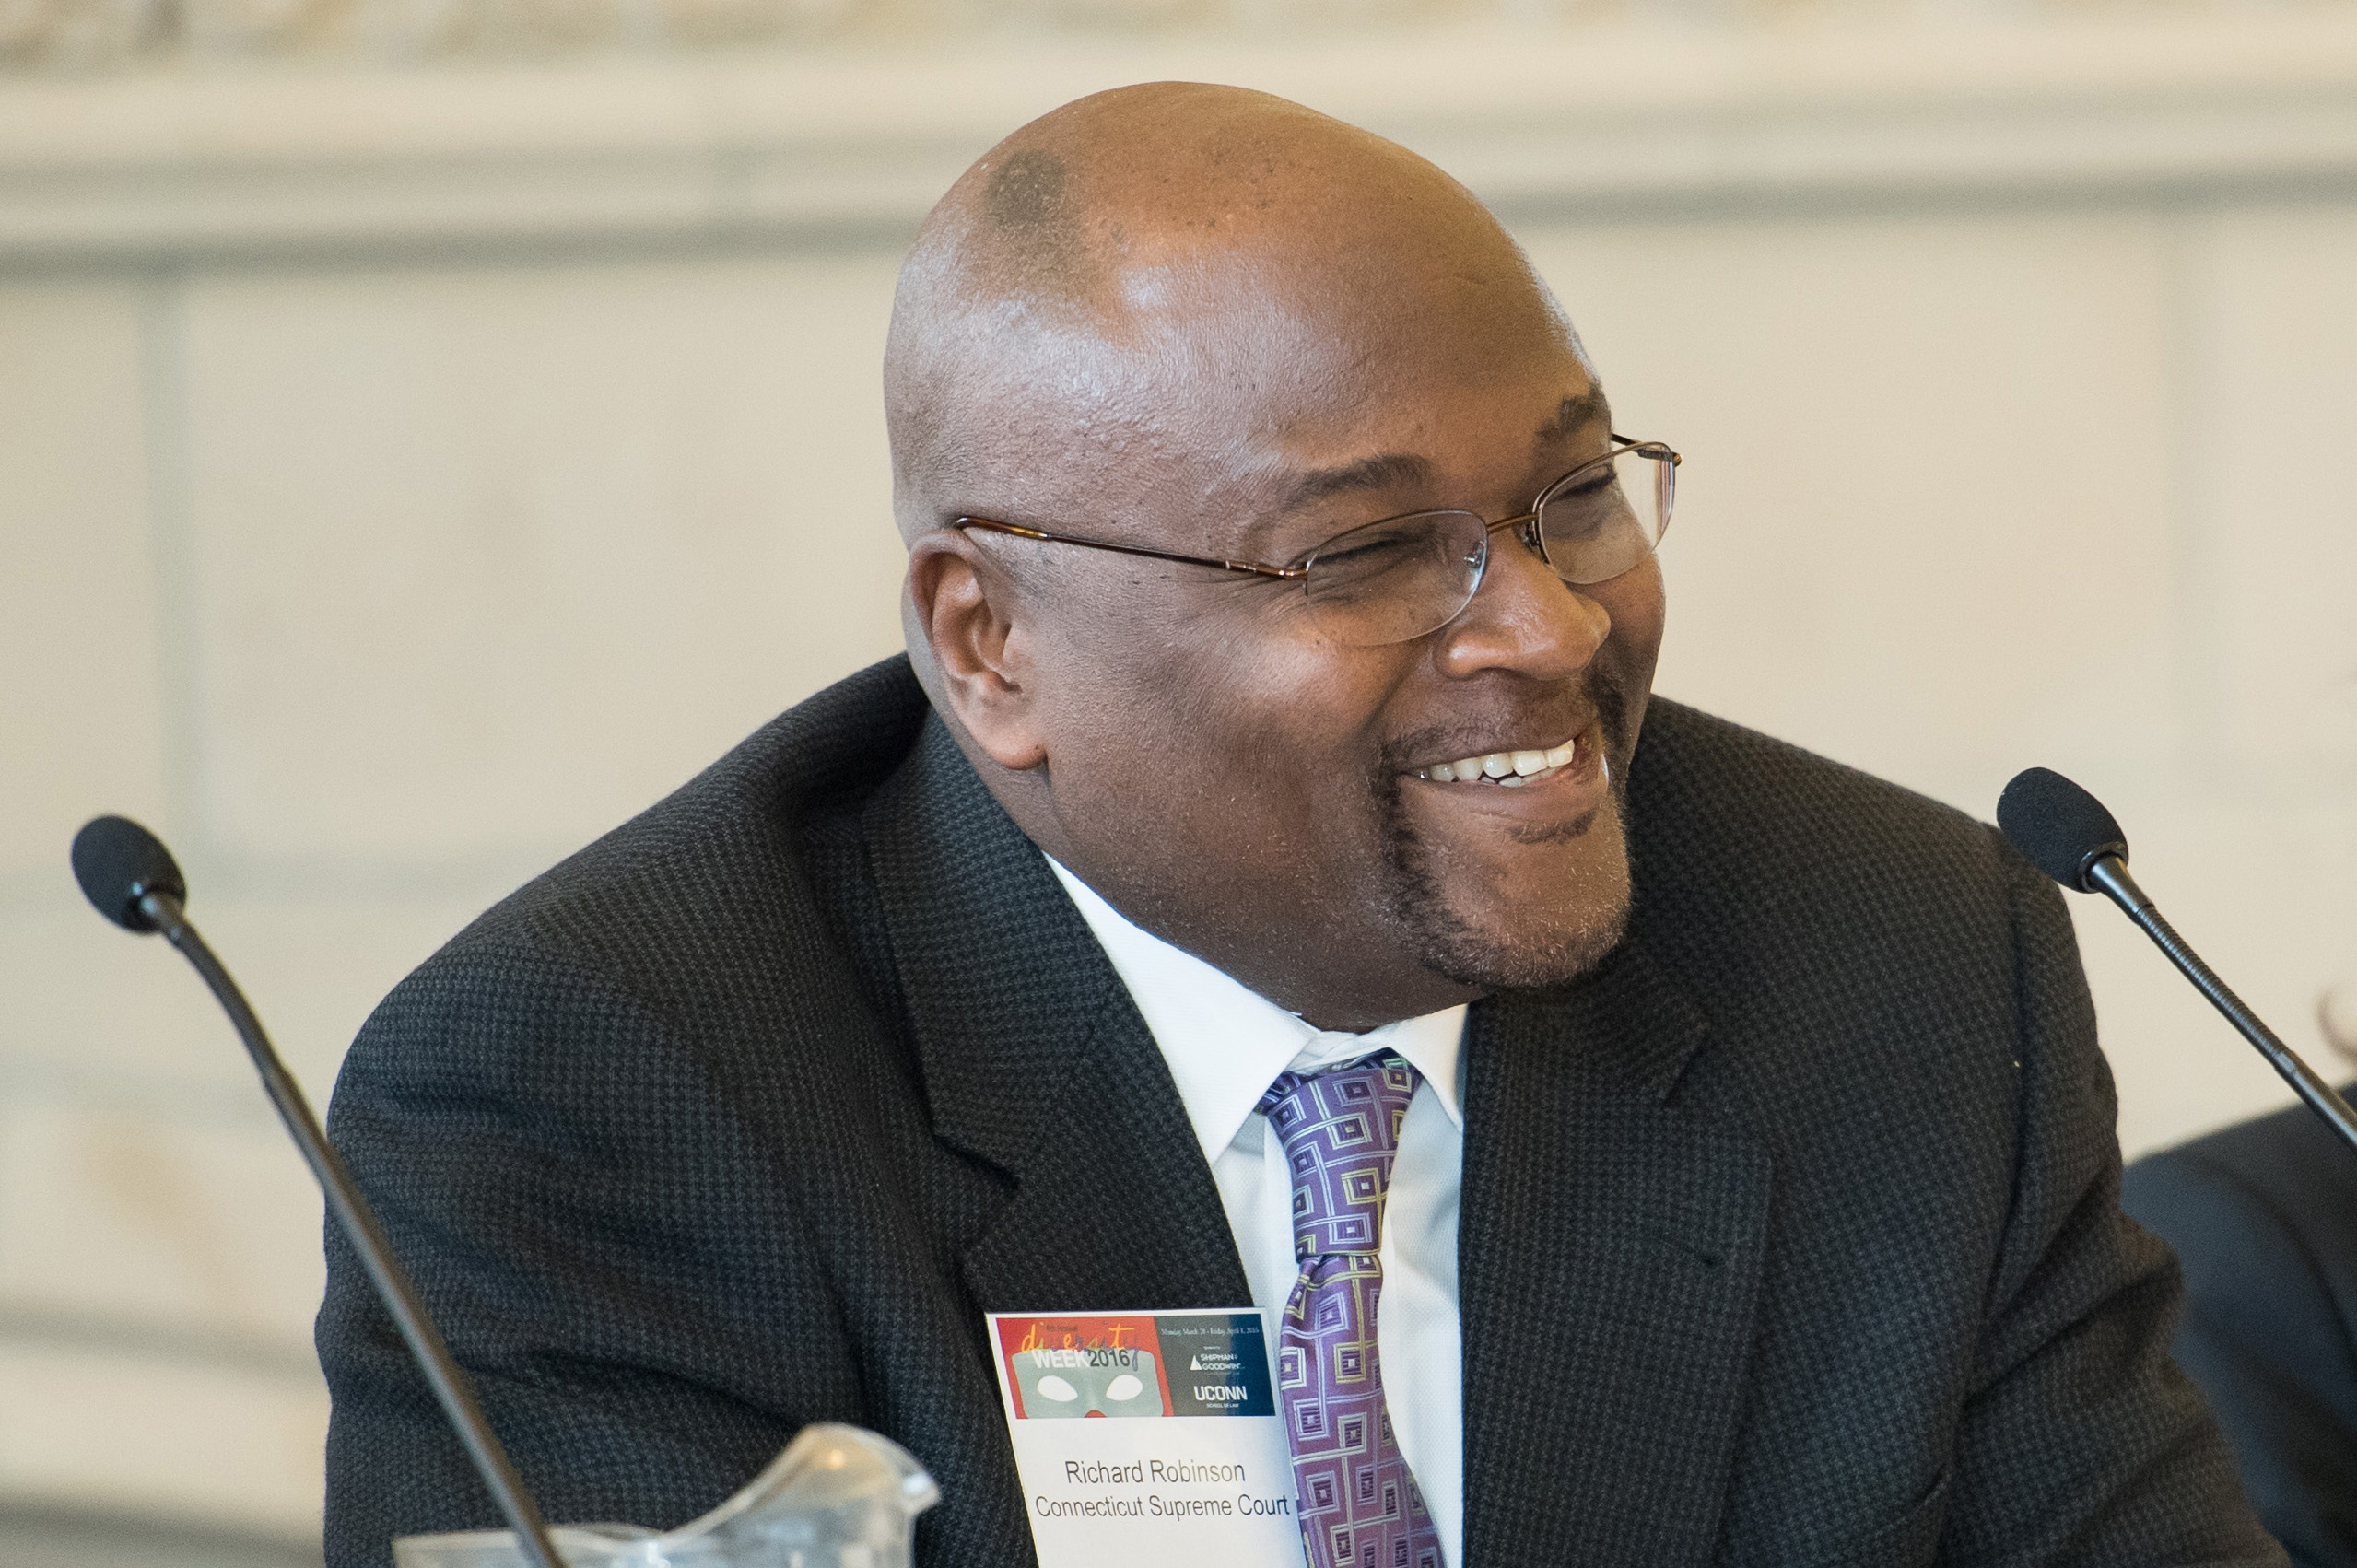 Richard A. Robinson '79 (CLAS) has been appointed as the next chief justice of the Connecticut Supreme Court. Here he is pictured as a speaker on a panel at UConn Law in 2016. (Spencer Sloan for UConn)